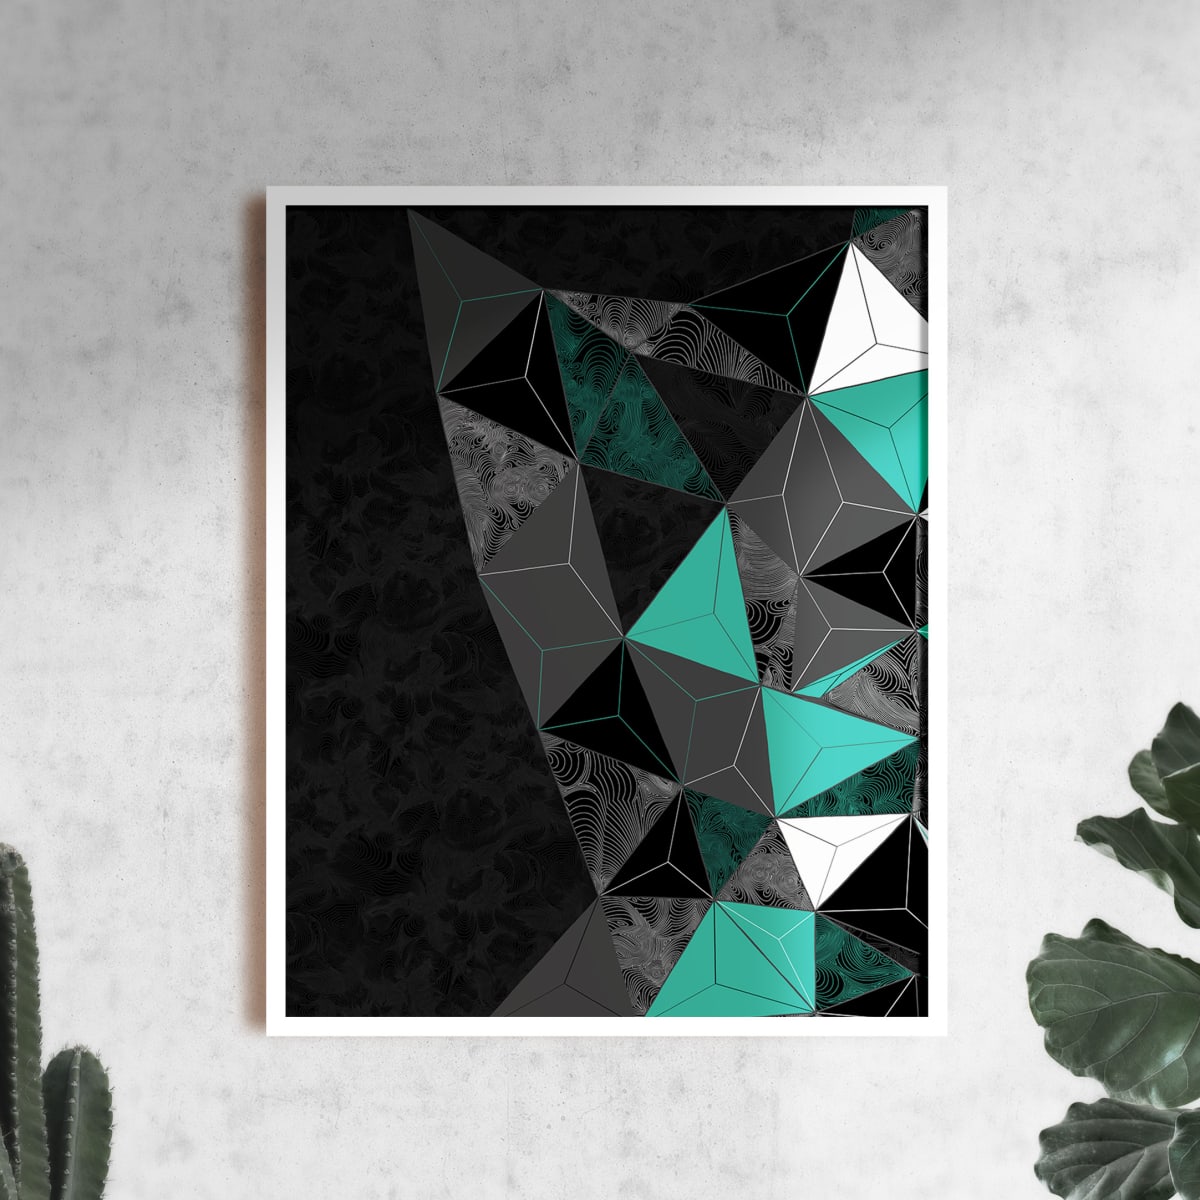 "Conscious Growth 095" Large One-of-a-Kind Print by Debbie Clapper  Image: Conscious Growth Print 095, a black, white, teal, and gray one of a kind archival modern art print